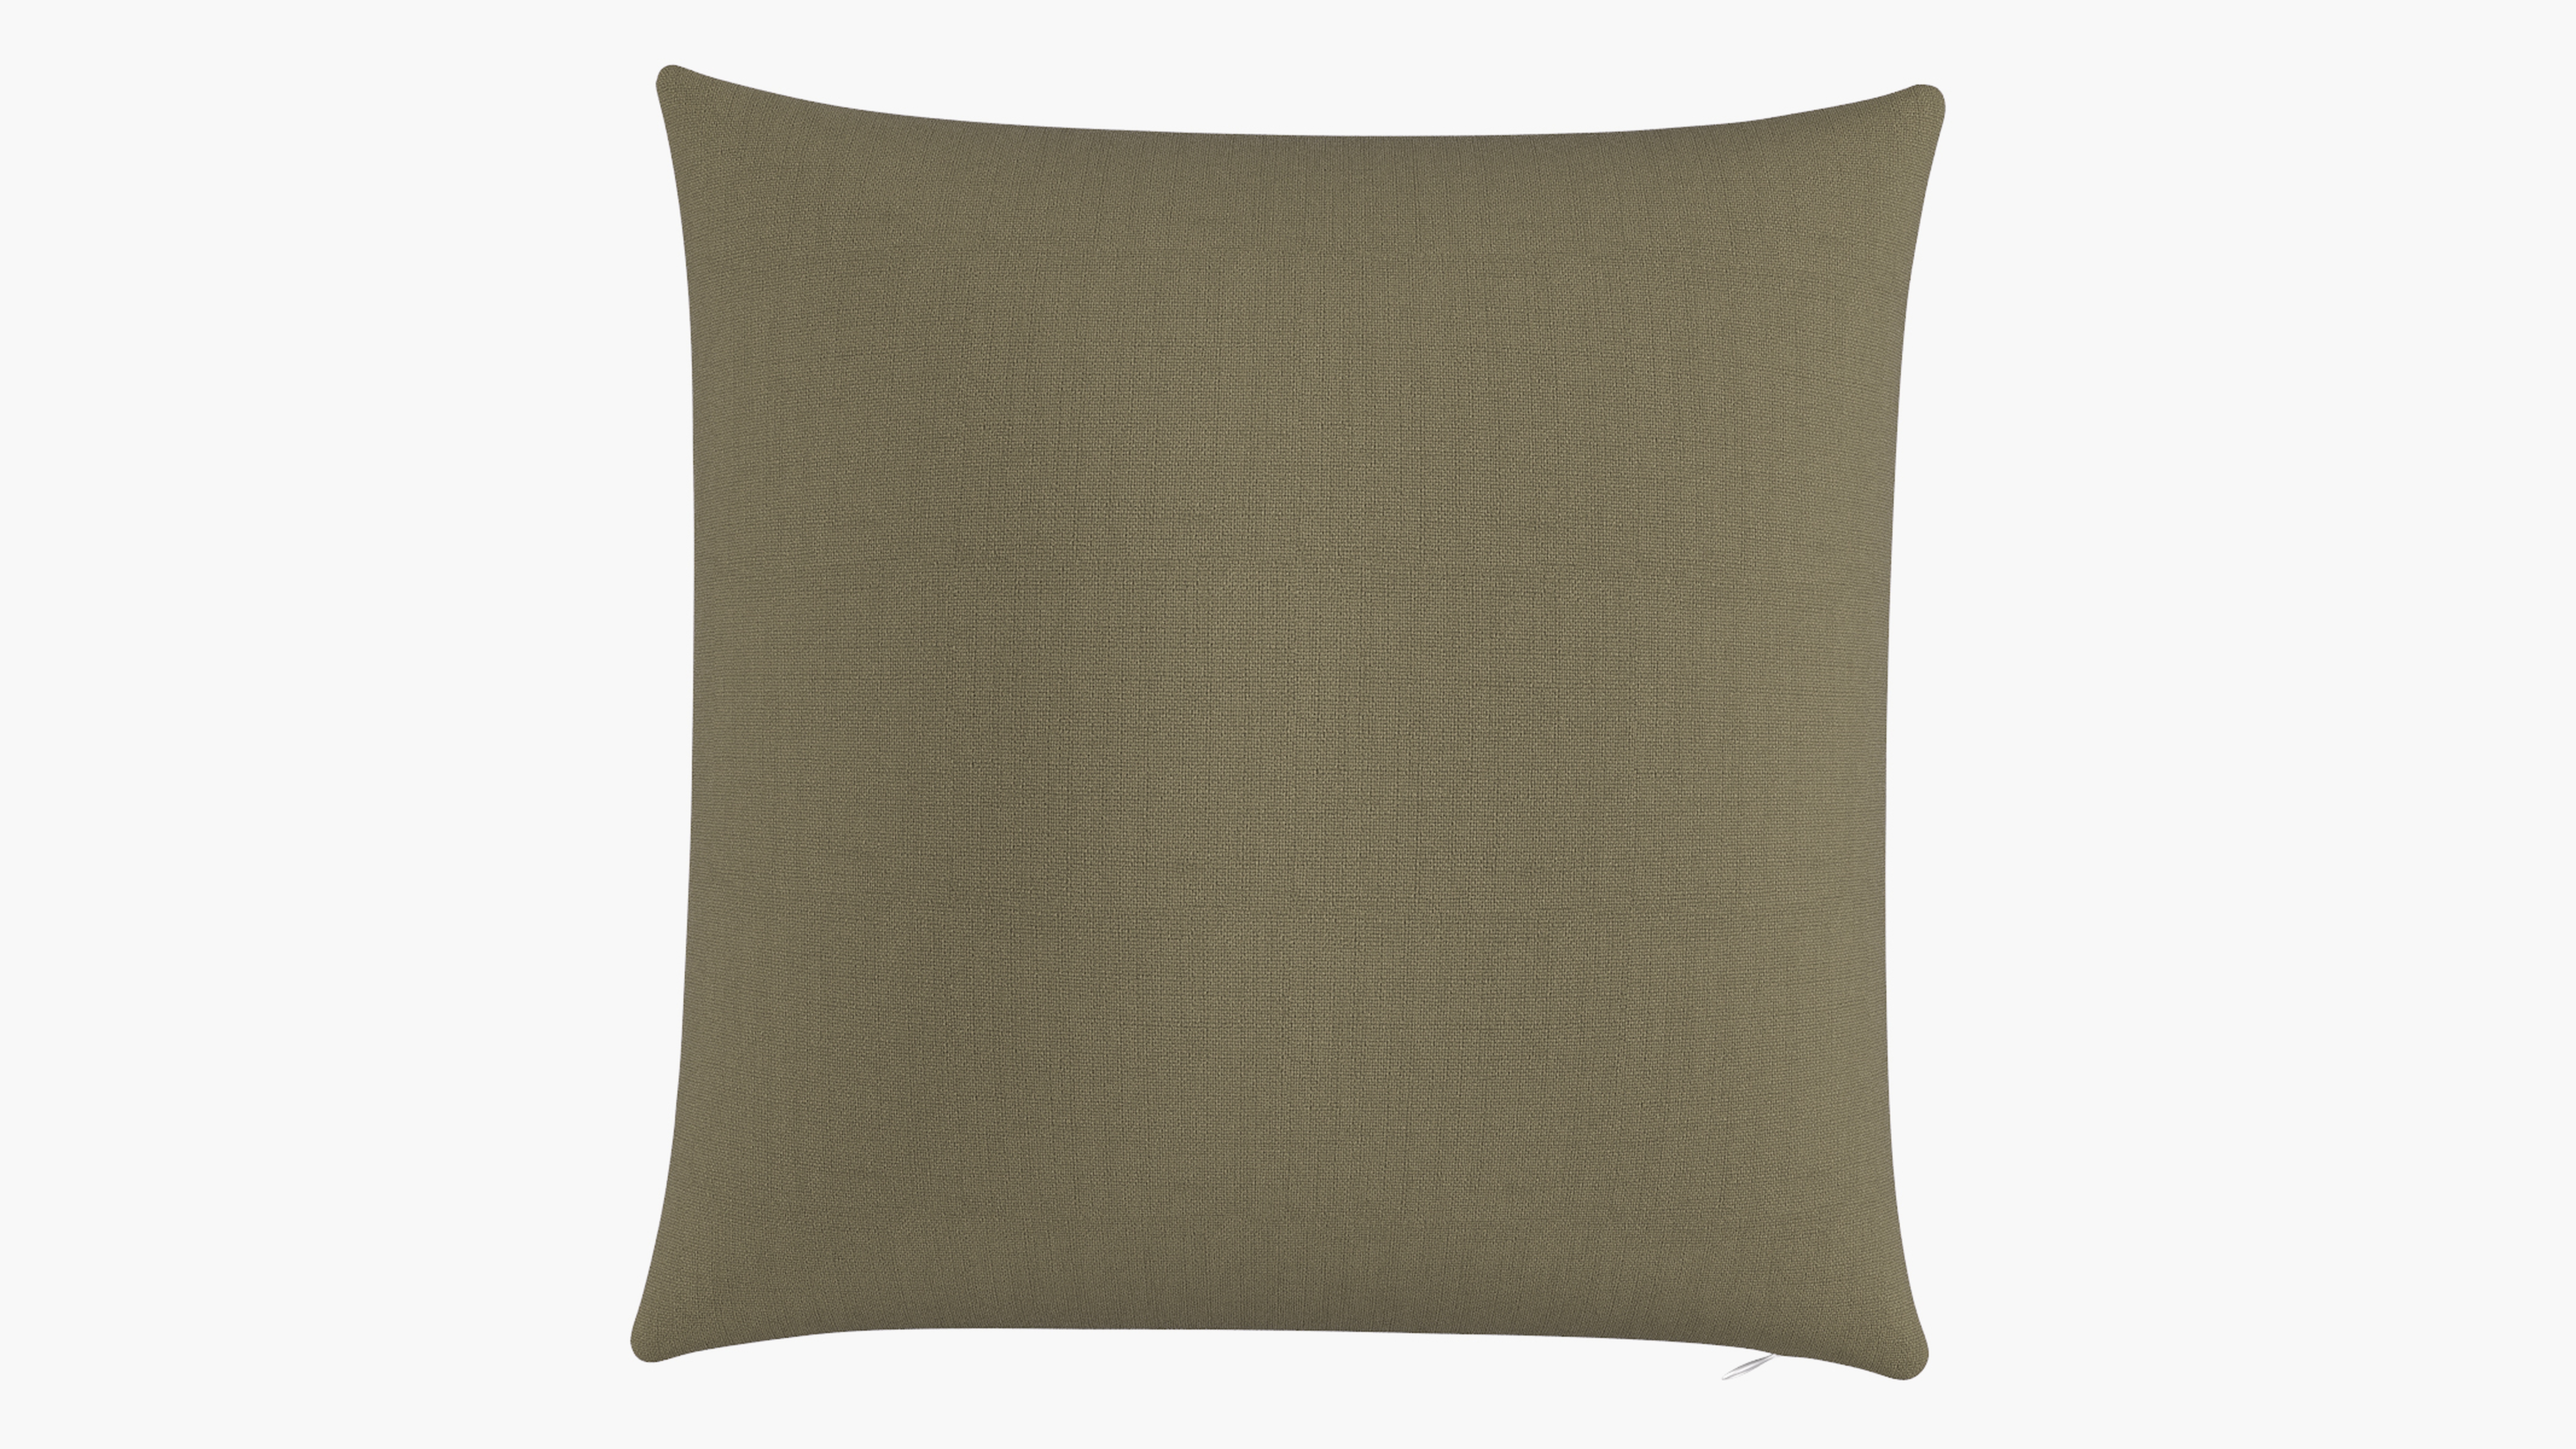 Throw Pillow 22", Olive Everyday Linen, 22" x 22" - The Inside